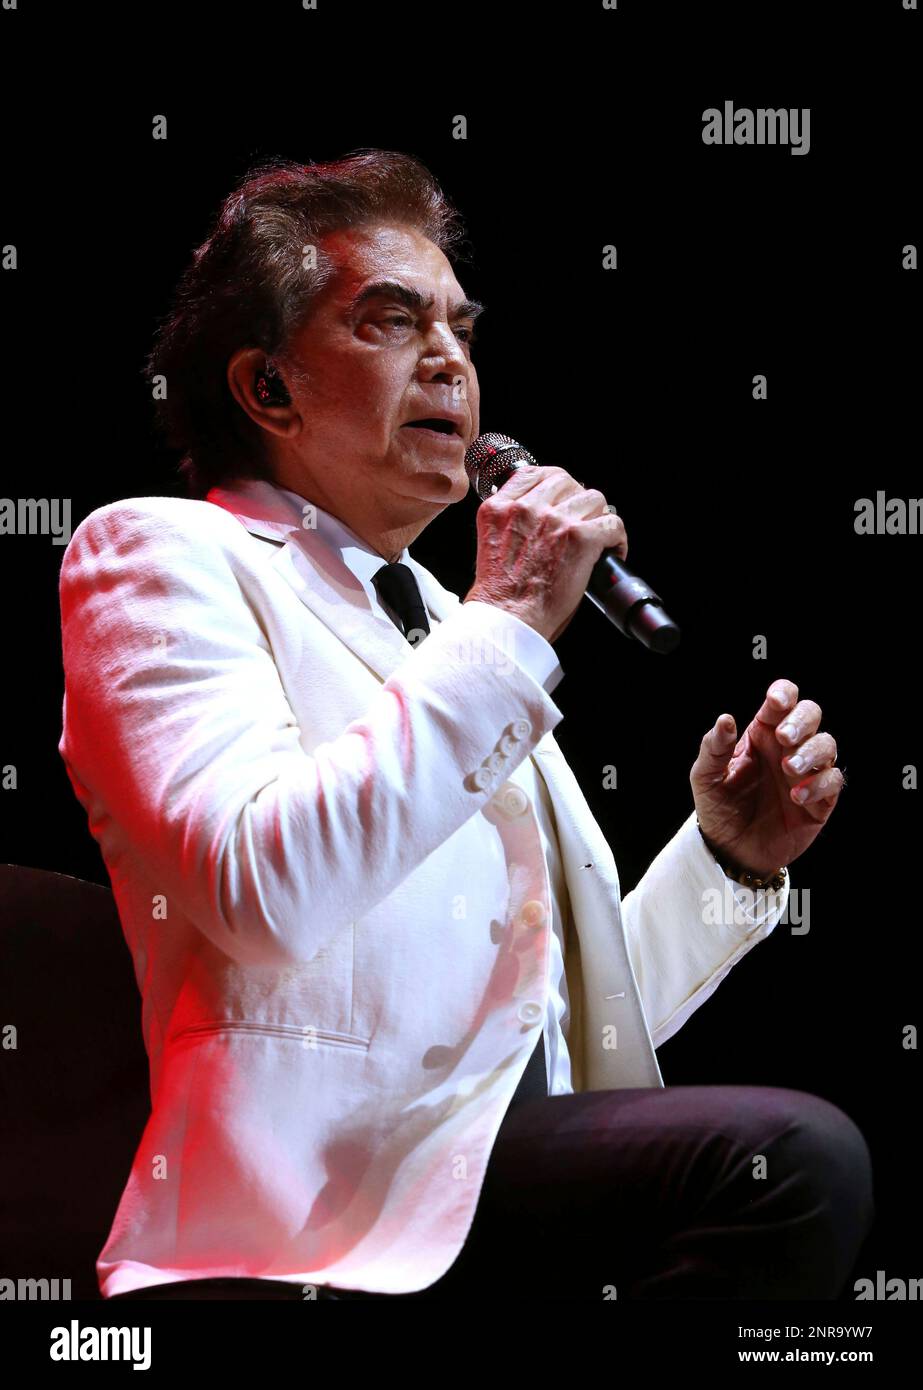 Photo by: zz/CT/EPX/STAR MAX/IPx 2020 2/7/20 Jose Luis Rodriguez aka El Puma  performing in concert on February 7, 2020 during his Agradecido Tour at  Mexico City Arena in Mexico City, Mexico Stock